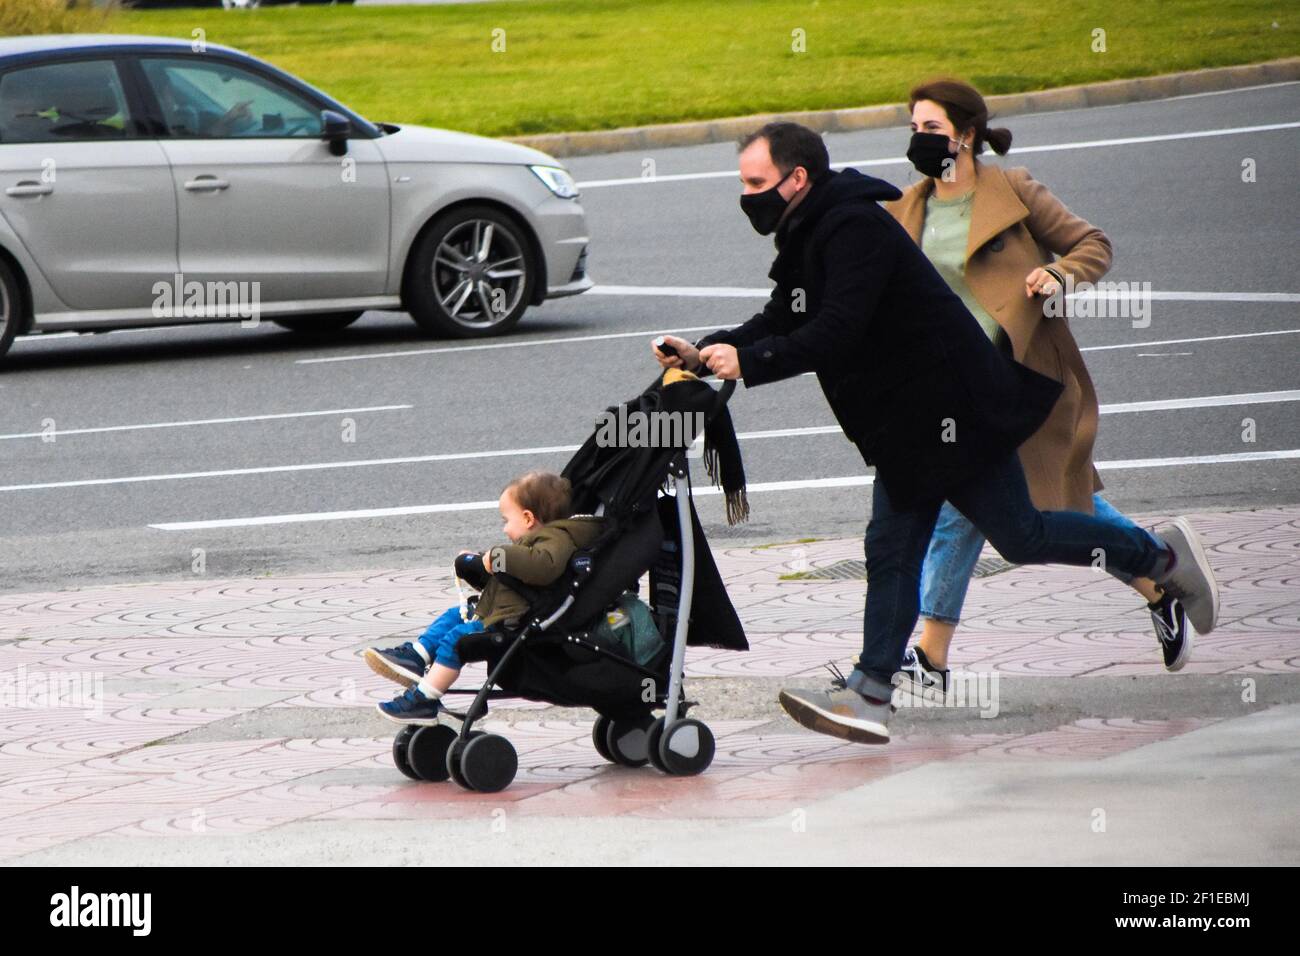 Stressed parents pushing a stroller with his son inside. They are running because they are late. Family, lifestyle, moment, everyday, real life. Stock Photo